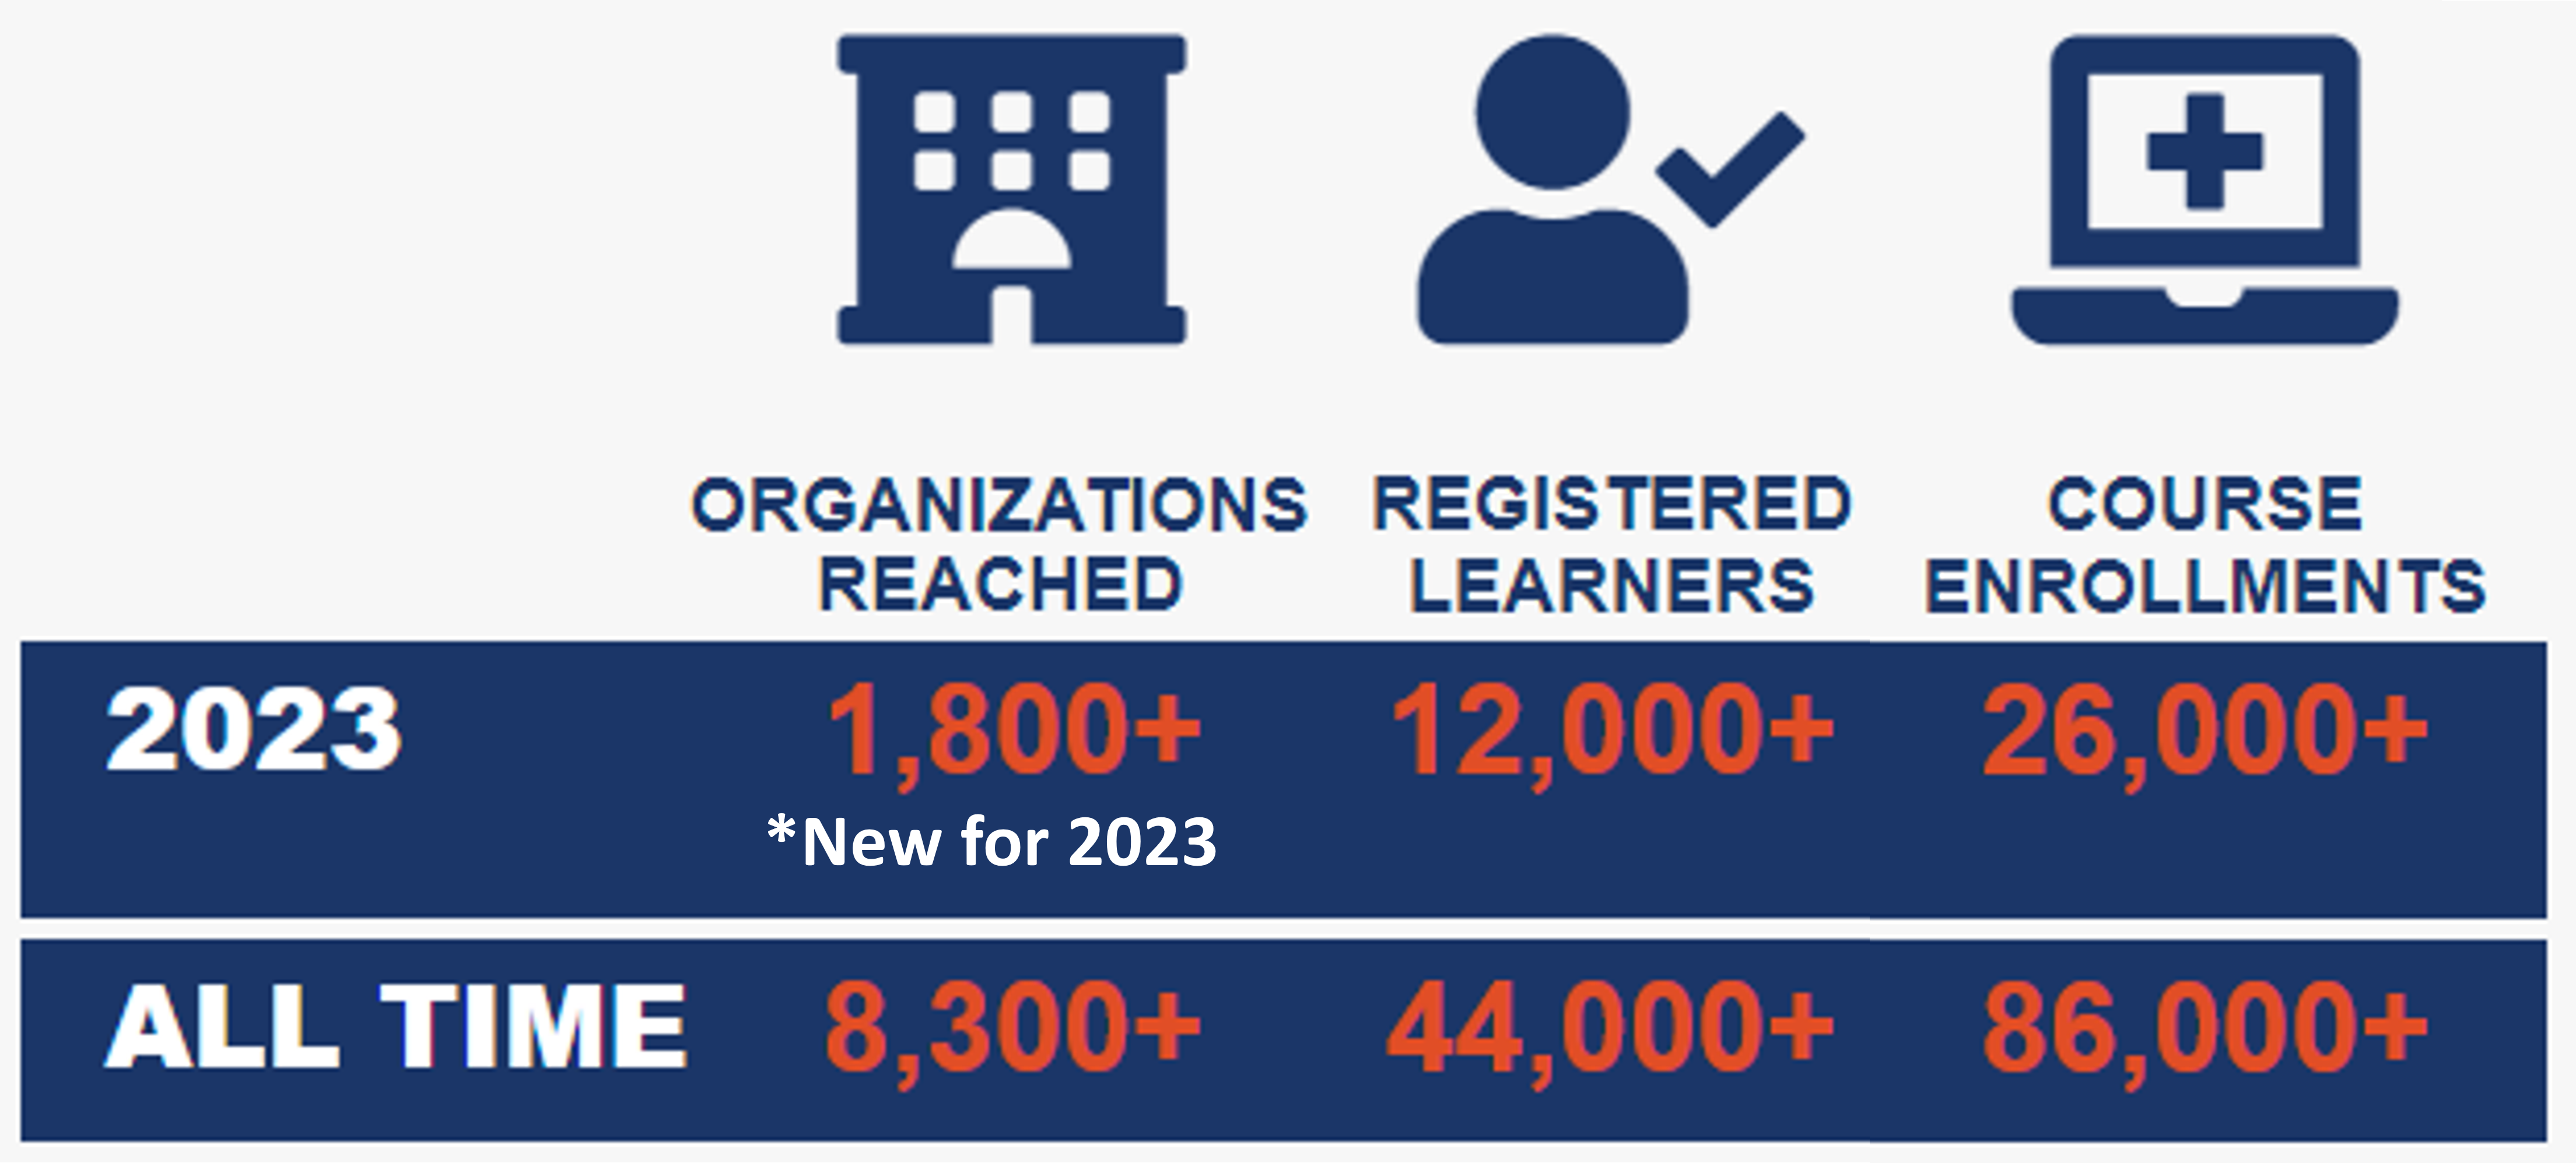 1,800 new agencies for 2023, 12,000 registered learners for 2023, 26,000 course enrollments for 2023, 8,300 all time agencies, 44,000 all time registered learners, 86,000 all time course enrollments